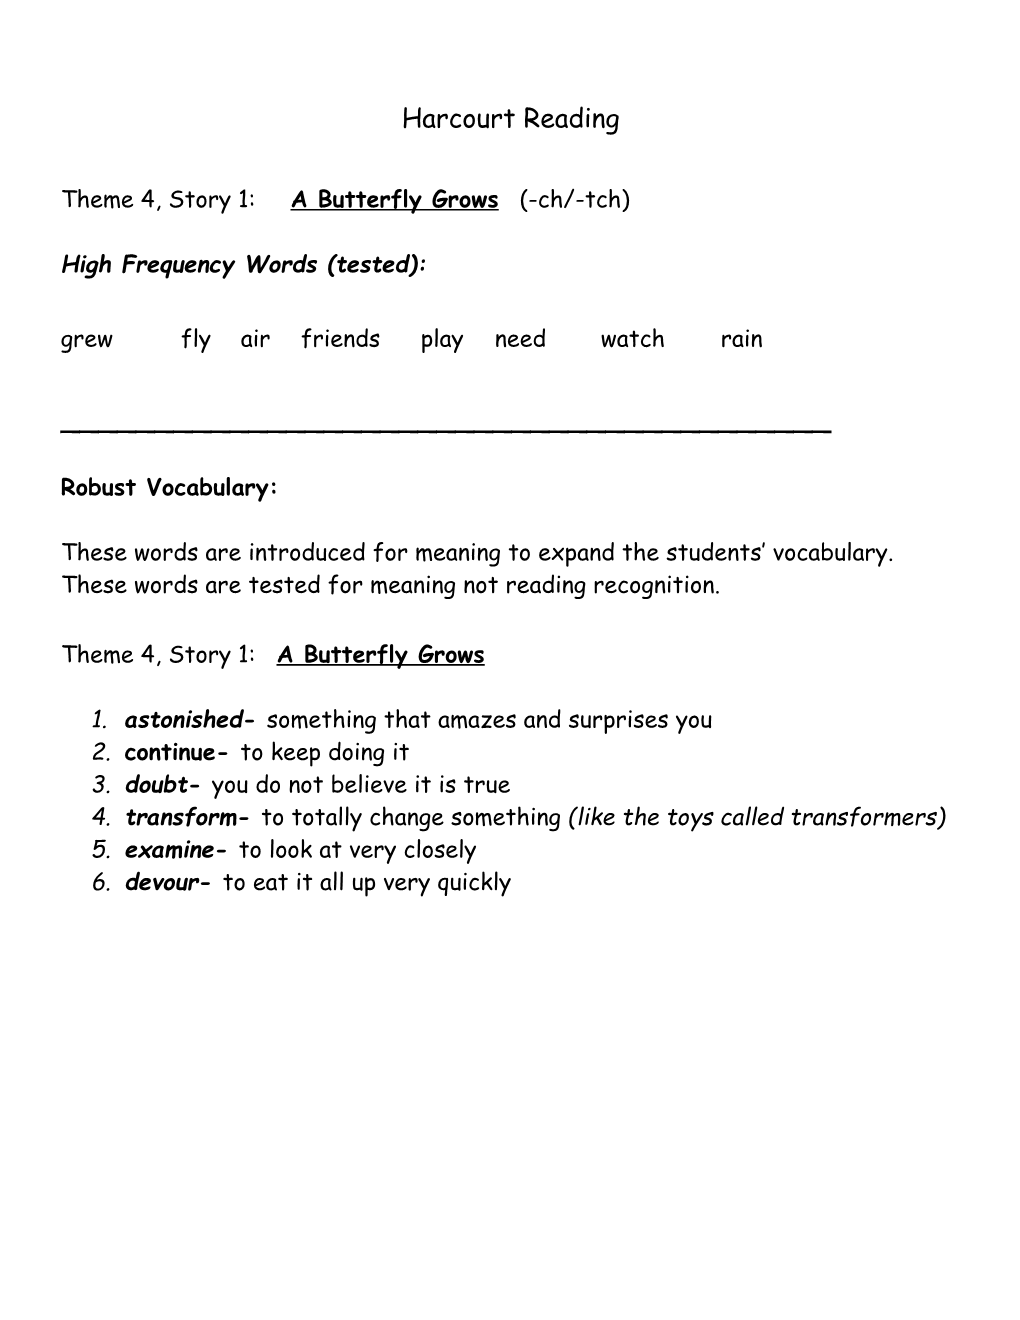 Theme 4, Story 1: a Butterfly Grows (-Ch/-Tch)